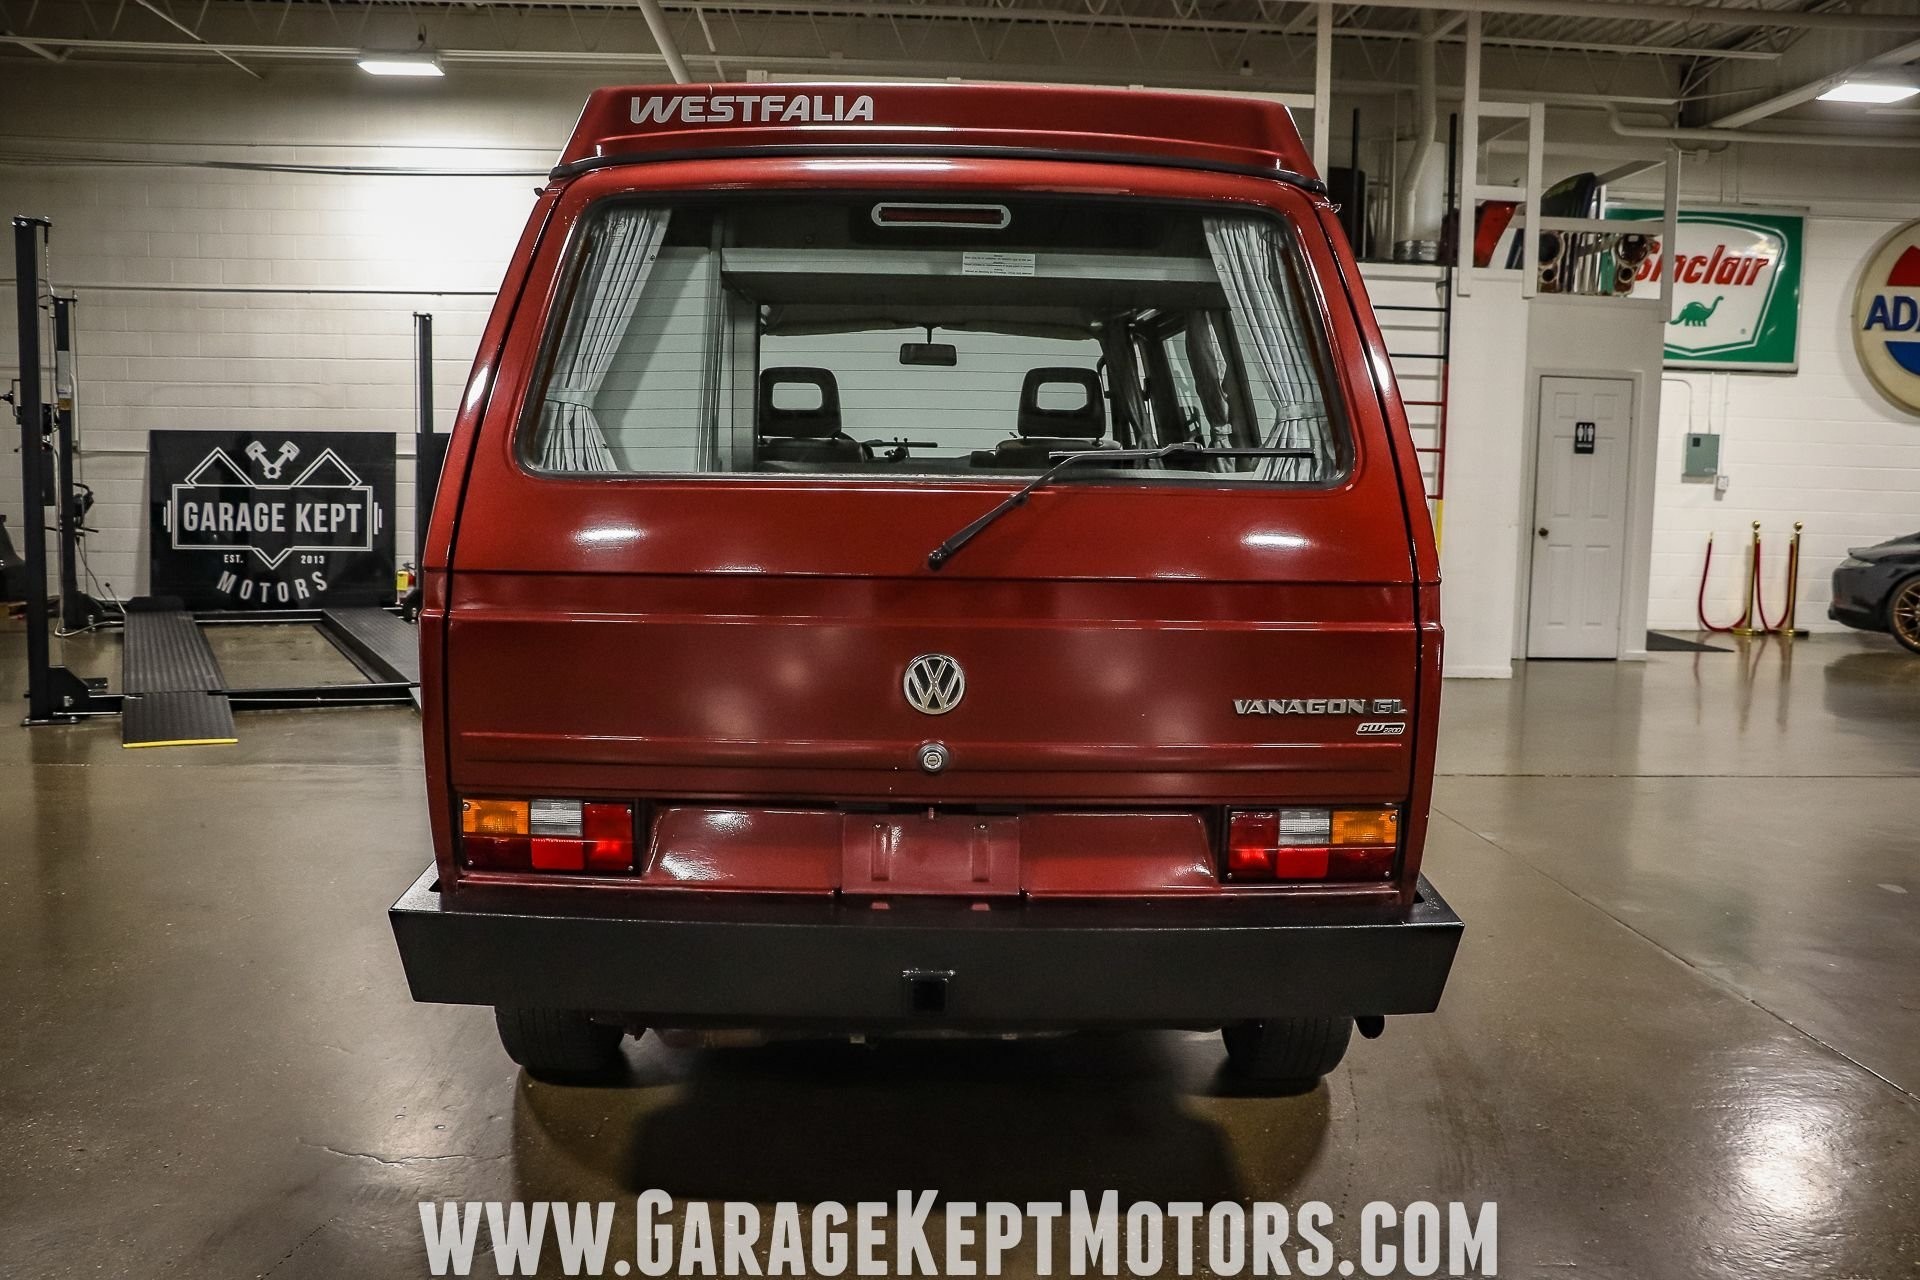 Titian Red 1989 VW Vanagon Westfalia Is One Jolly Summer Camper, Also Pricey  - autoevolution